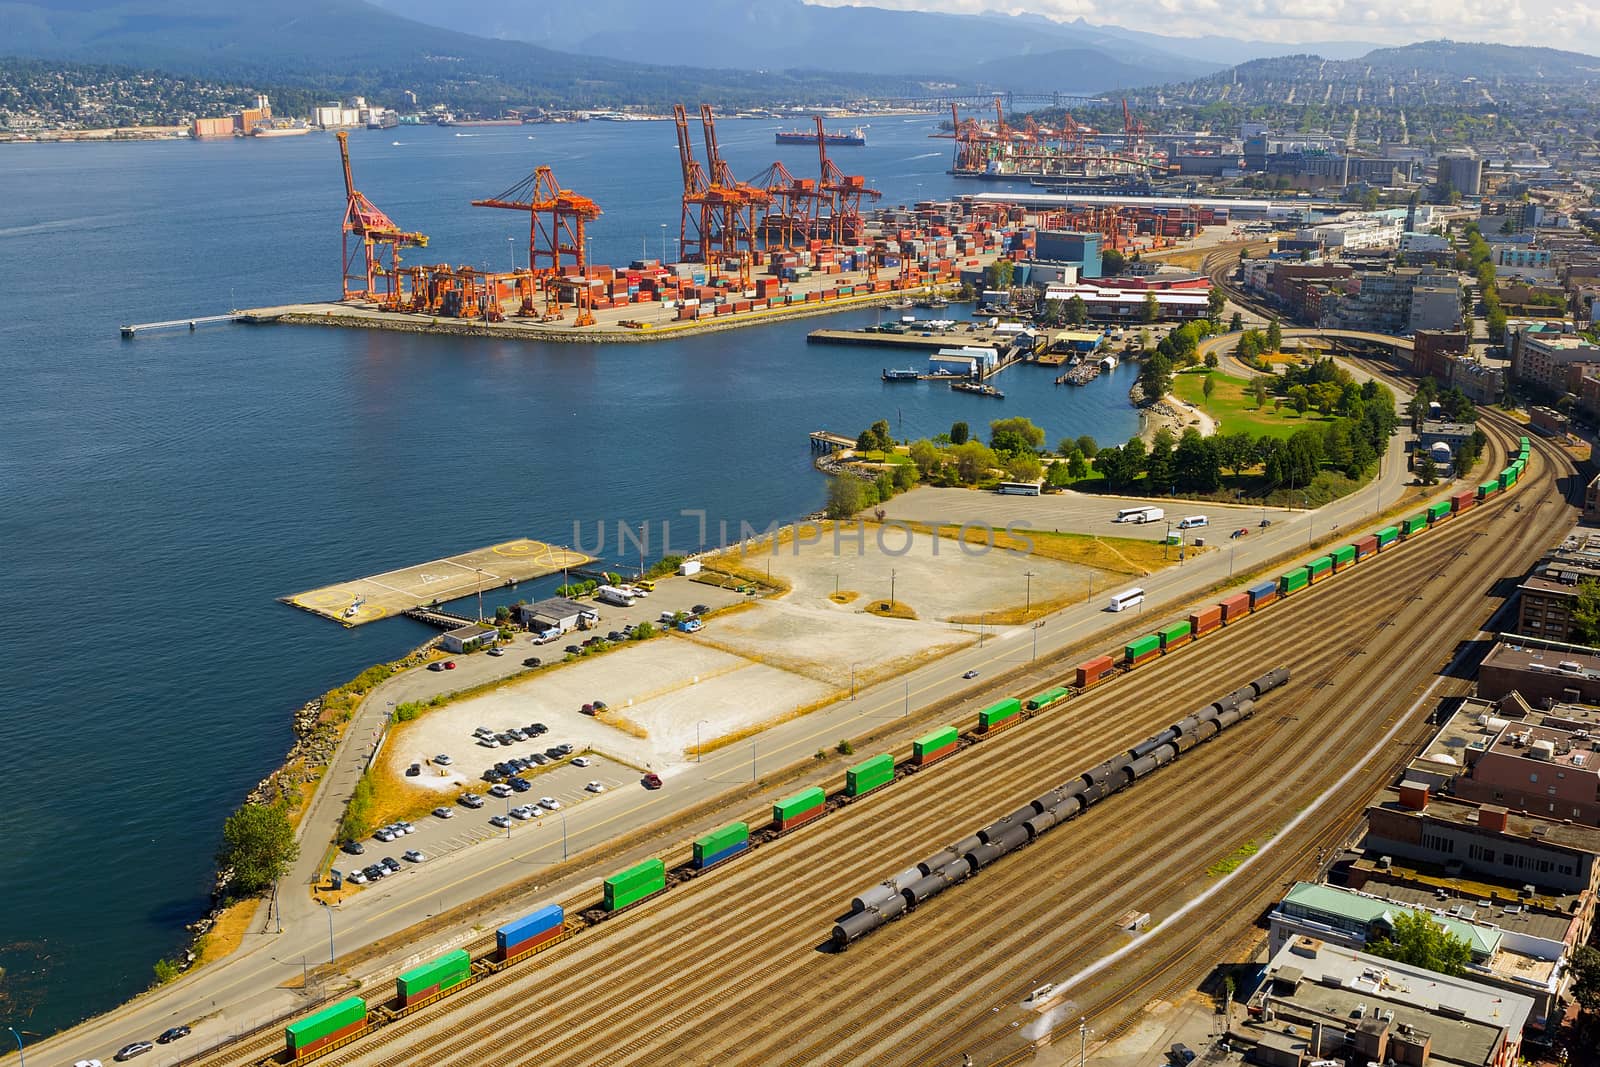 Port of Vancouver British Columbia Canada with containers shipyard cranes and train railroad tracks transportation